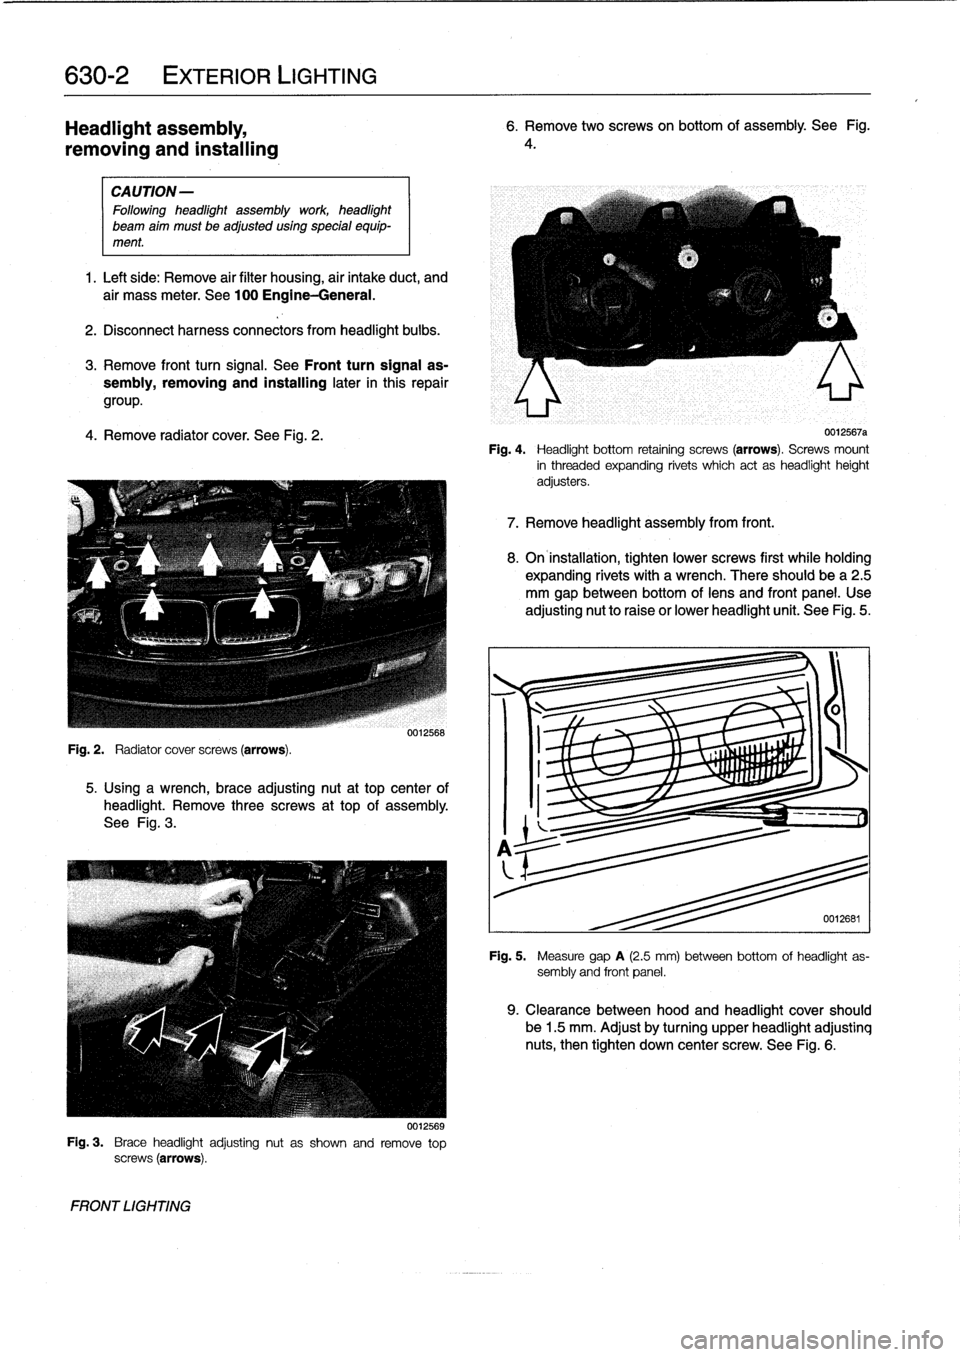 BMW 323i 1992 E36 Workshop Manual 
630-2

	

EXTERIOR
LIGHTING

Headlight
assembly,

removing
and
installing

CAUTION-

Followingheadlight
assembly
work
headlight

beam
aim
must
be
adjusted
using
special
equip-
ment
.

1
.
Left
side
: